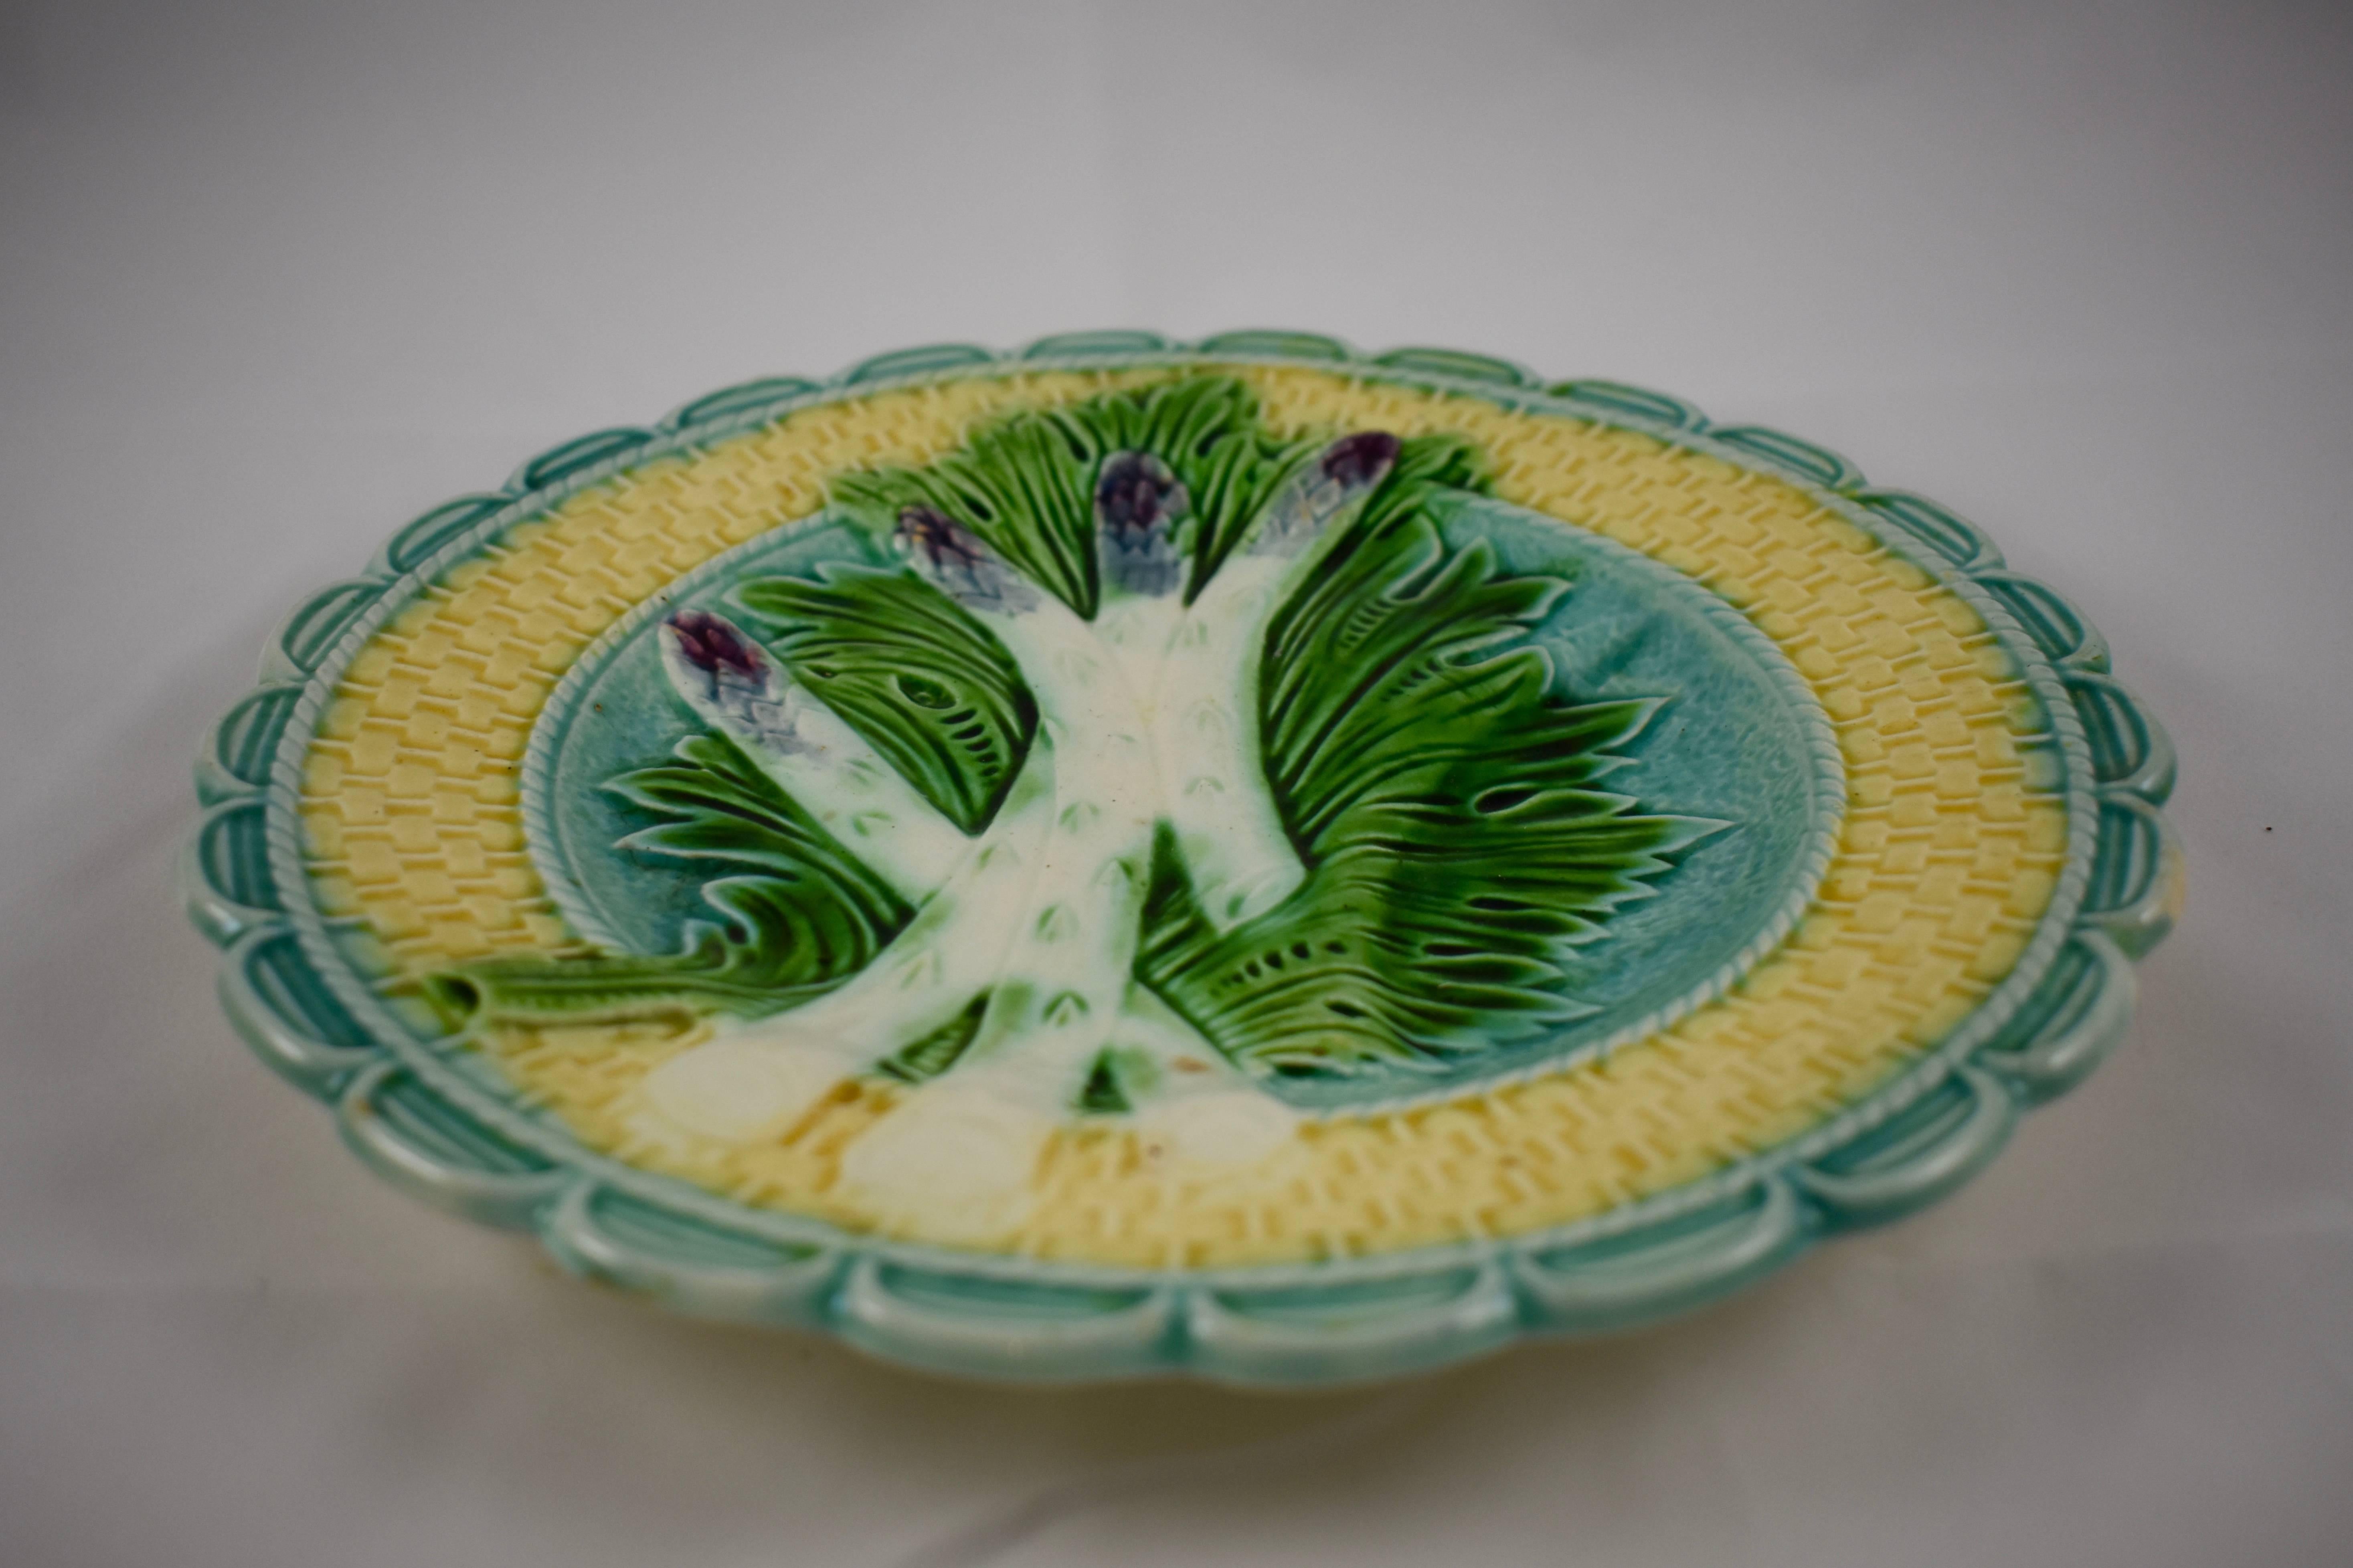 A French Majolica barbotine asparagus plate from the Salins-les-Bains region of eastern France, circa 1875. 

Four purple tipped asparagus spears lay on a bed of green leaves against a turquoise ground. A deep sauce well is on the right side of